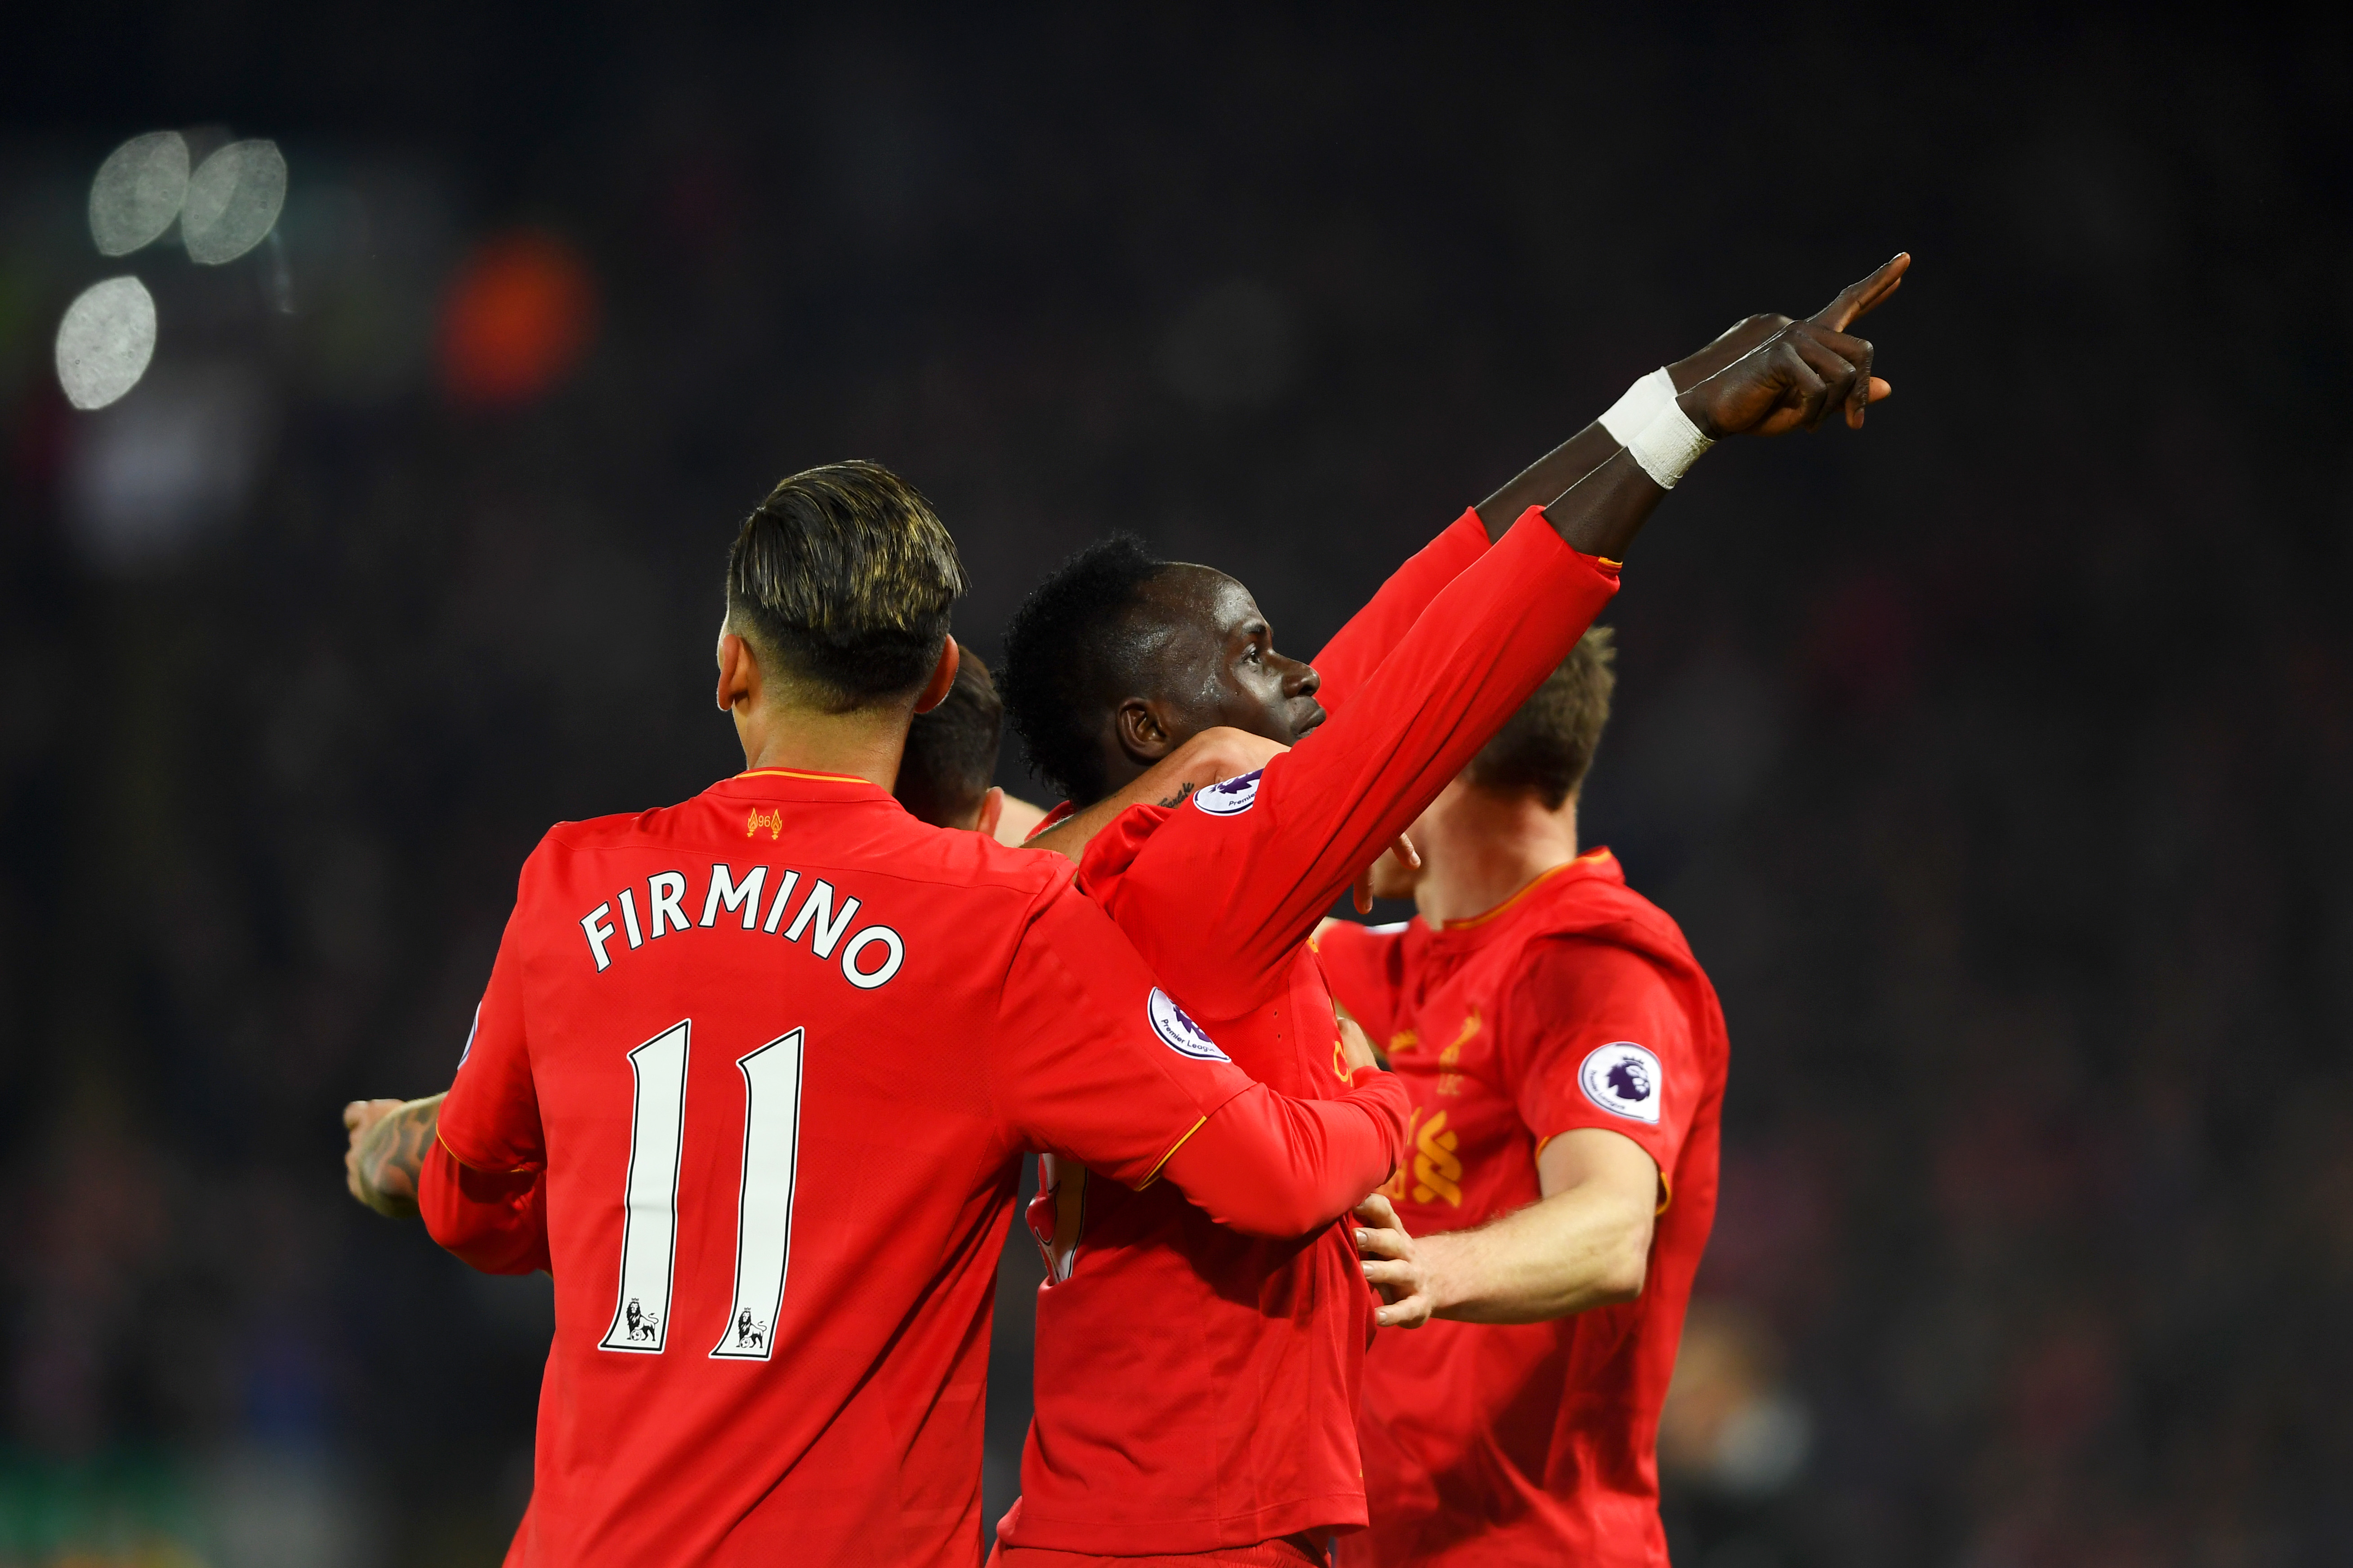 LIVERPOOL, ENGLAND - FEBRUARY 11: Sadio Mane (C) of Liverpool celebrates scoring the oprning goal with his team mates during the Premier League match between Liverpool and Tottenham Hotspur at Anfield on February 11, 2017 in Liverpool, England.  (Photo by Mike Hewitt/Getty Images for Tottenham Hotspur FC)